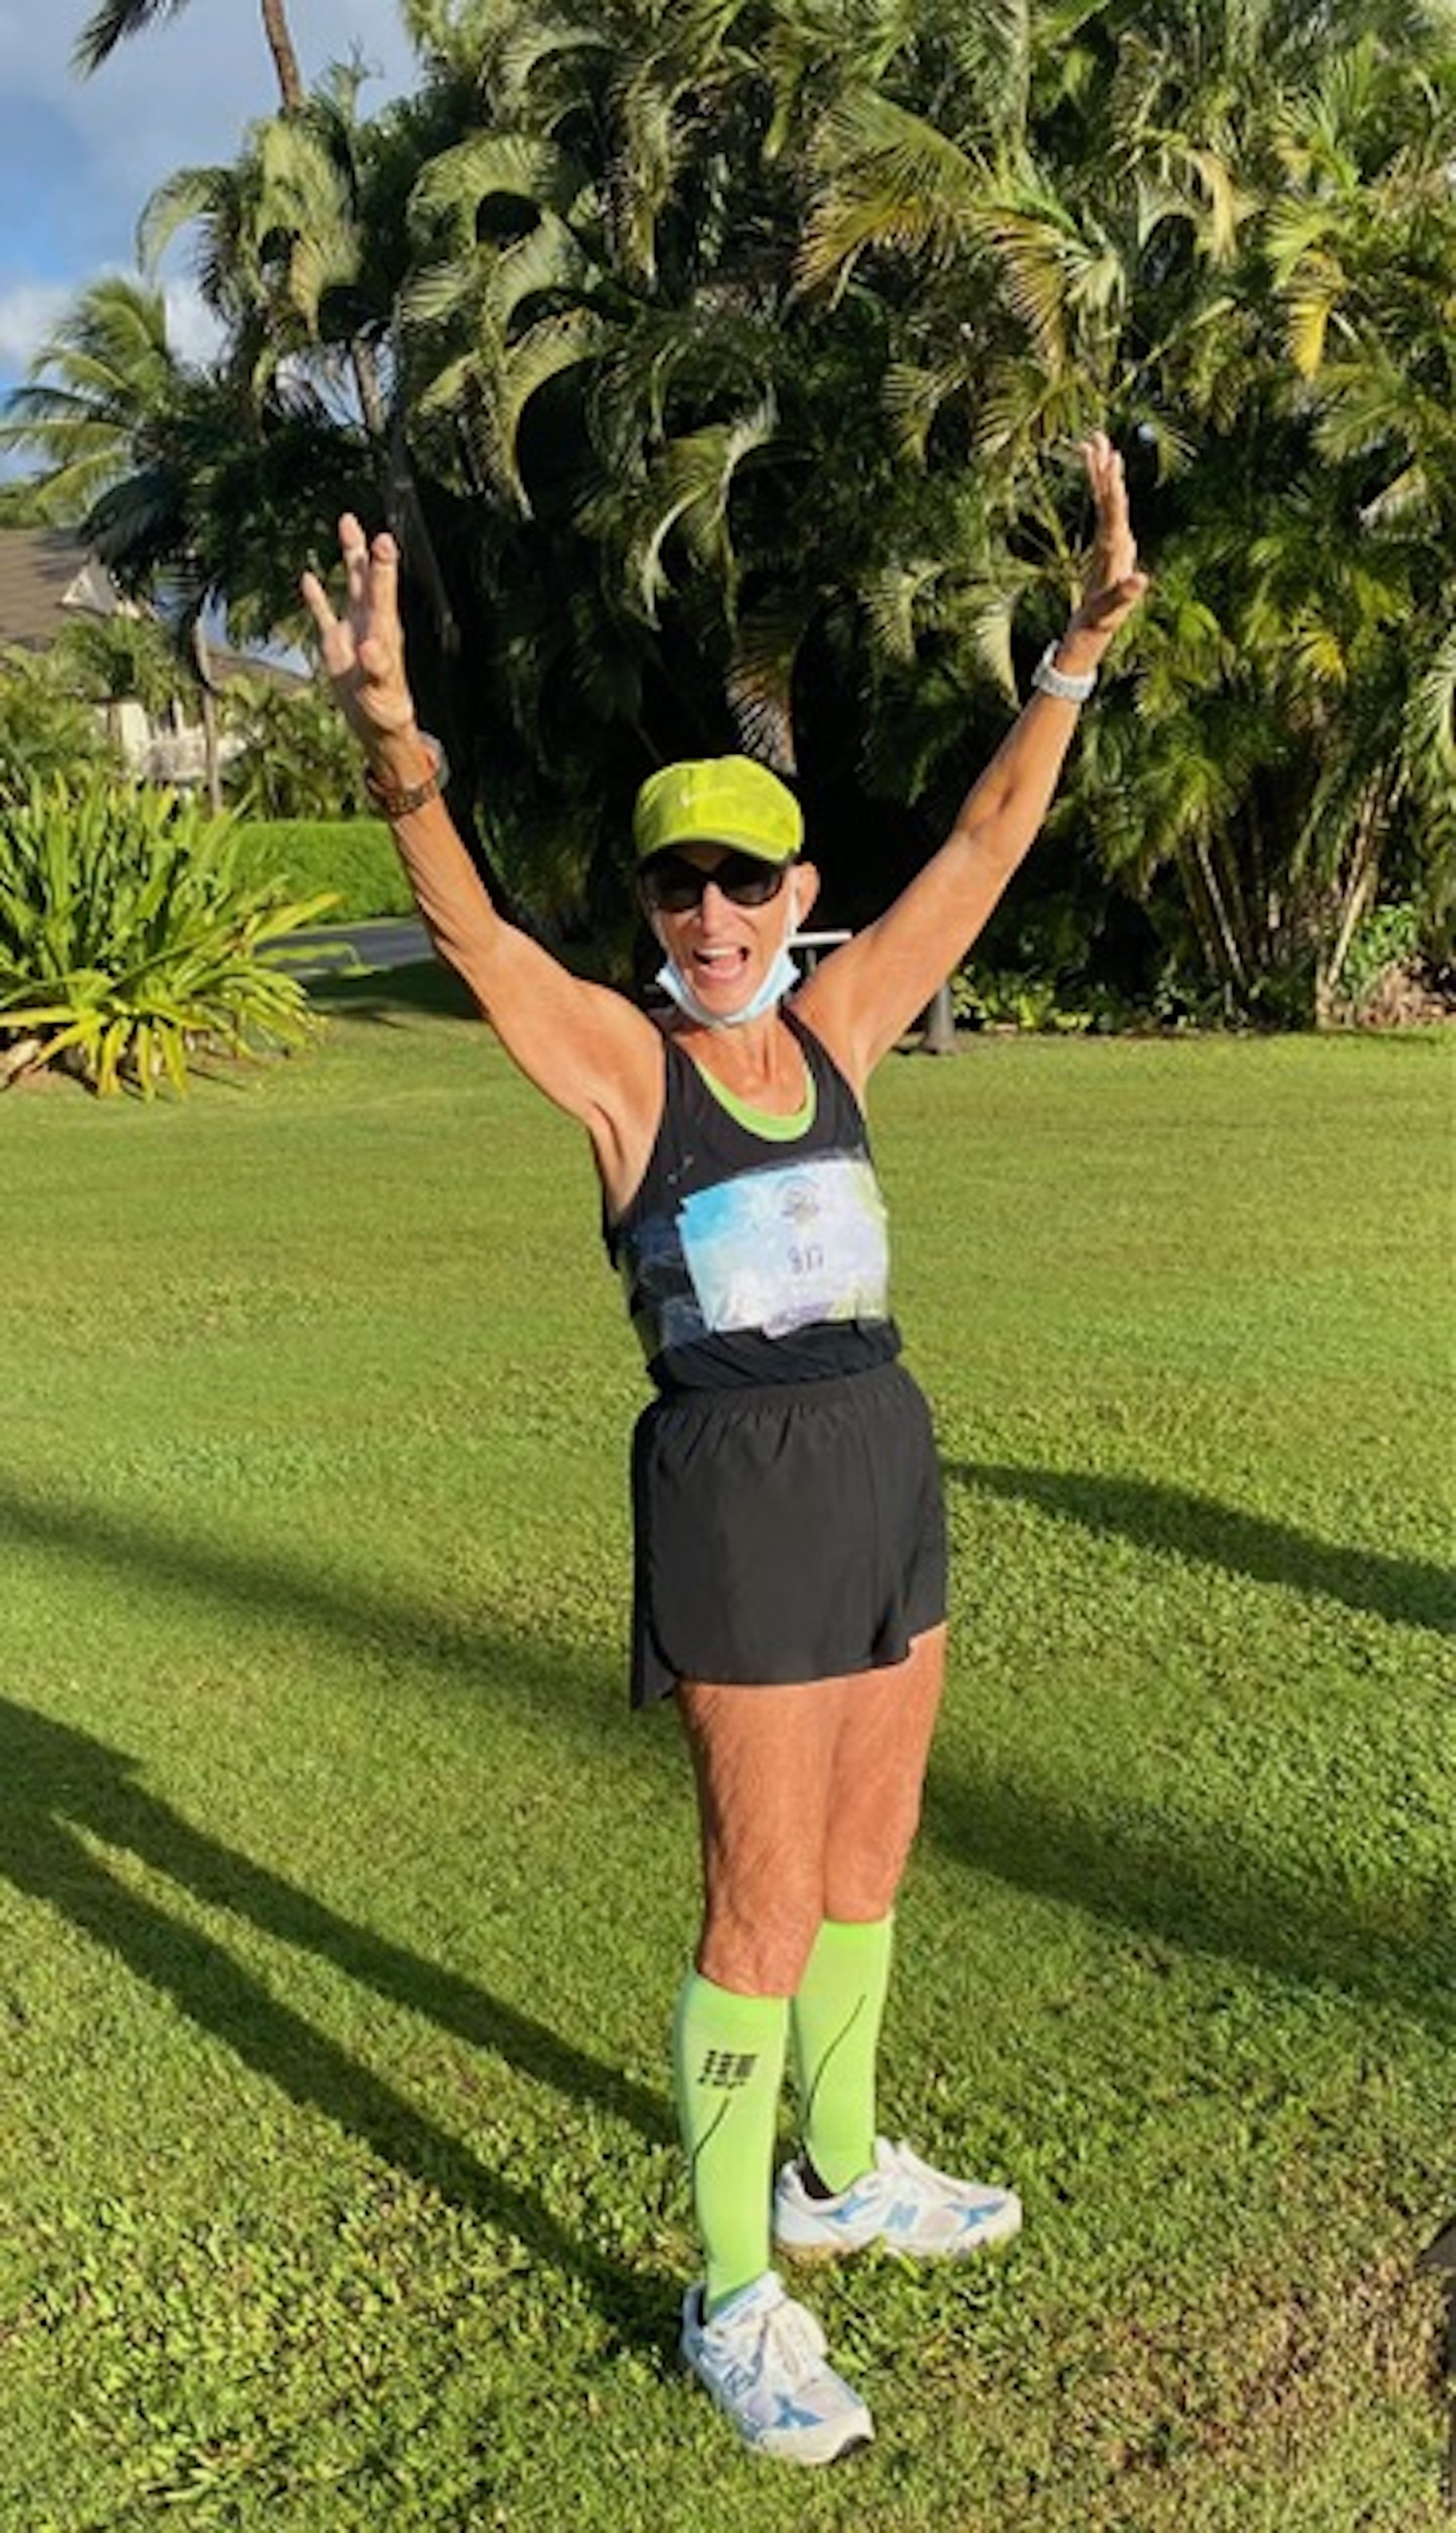 In 2022, Mathea Allansmith, then 92, finished the Honolulu marathon, making her the oldest women to complete the 26.2-mile race. She shares her secrets to a long and healthy life. Photo: Mathea Allansmith